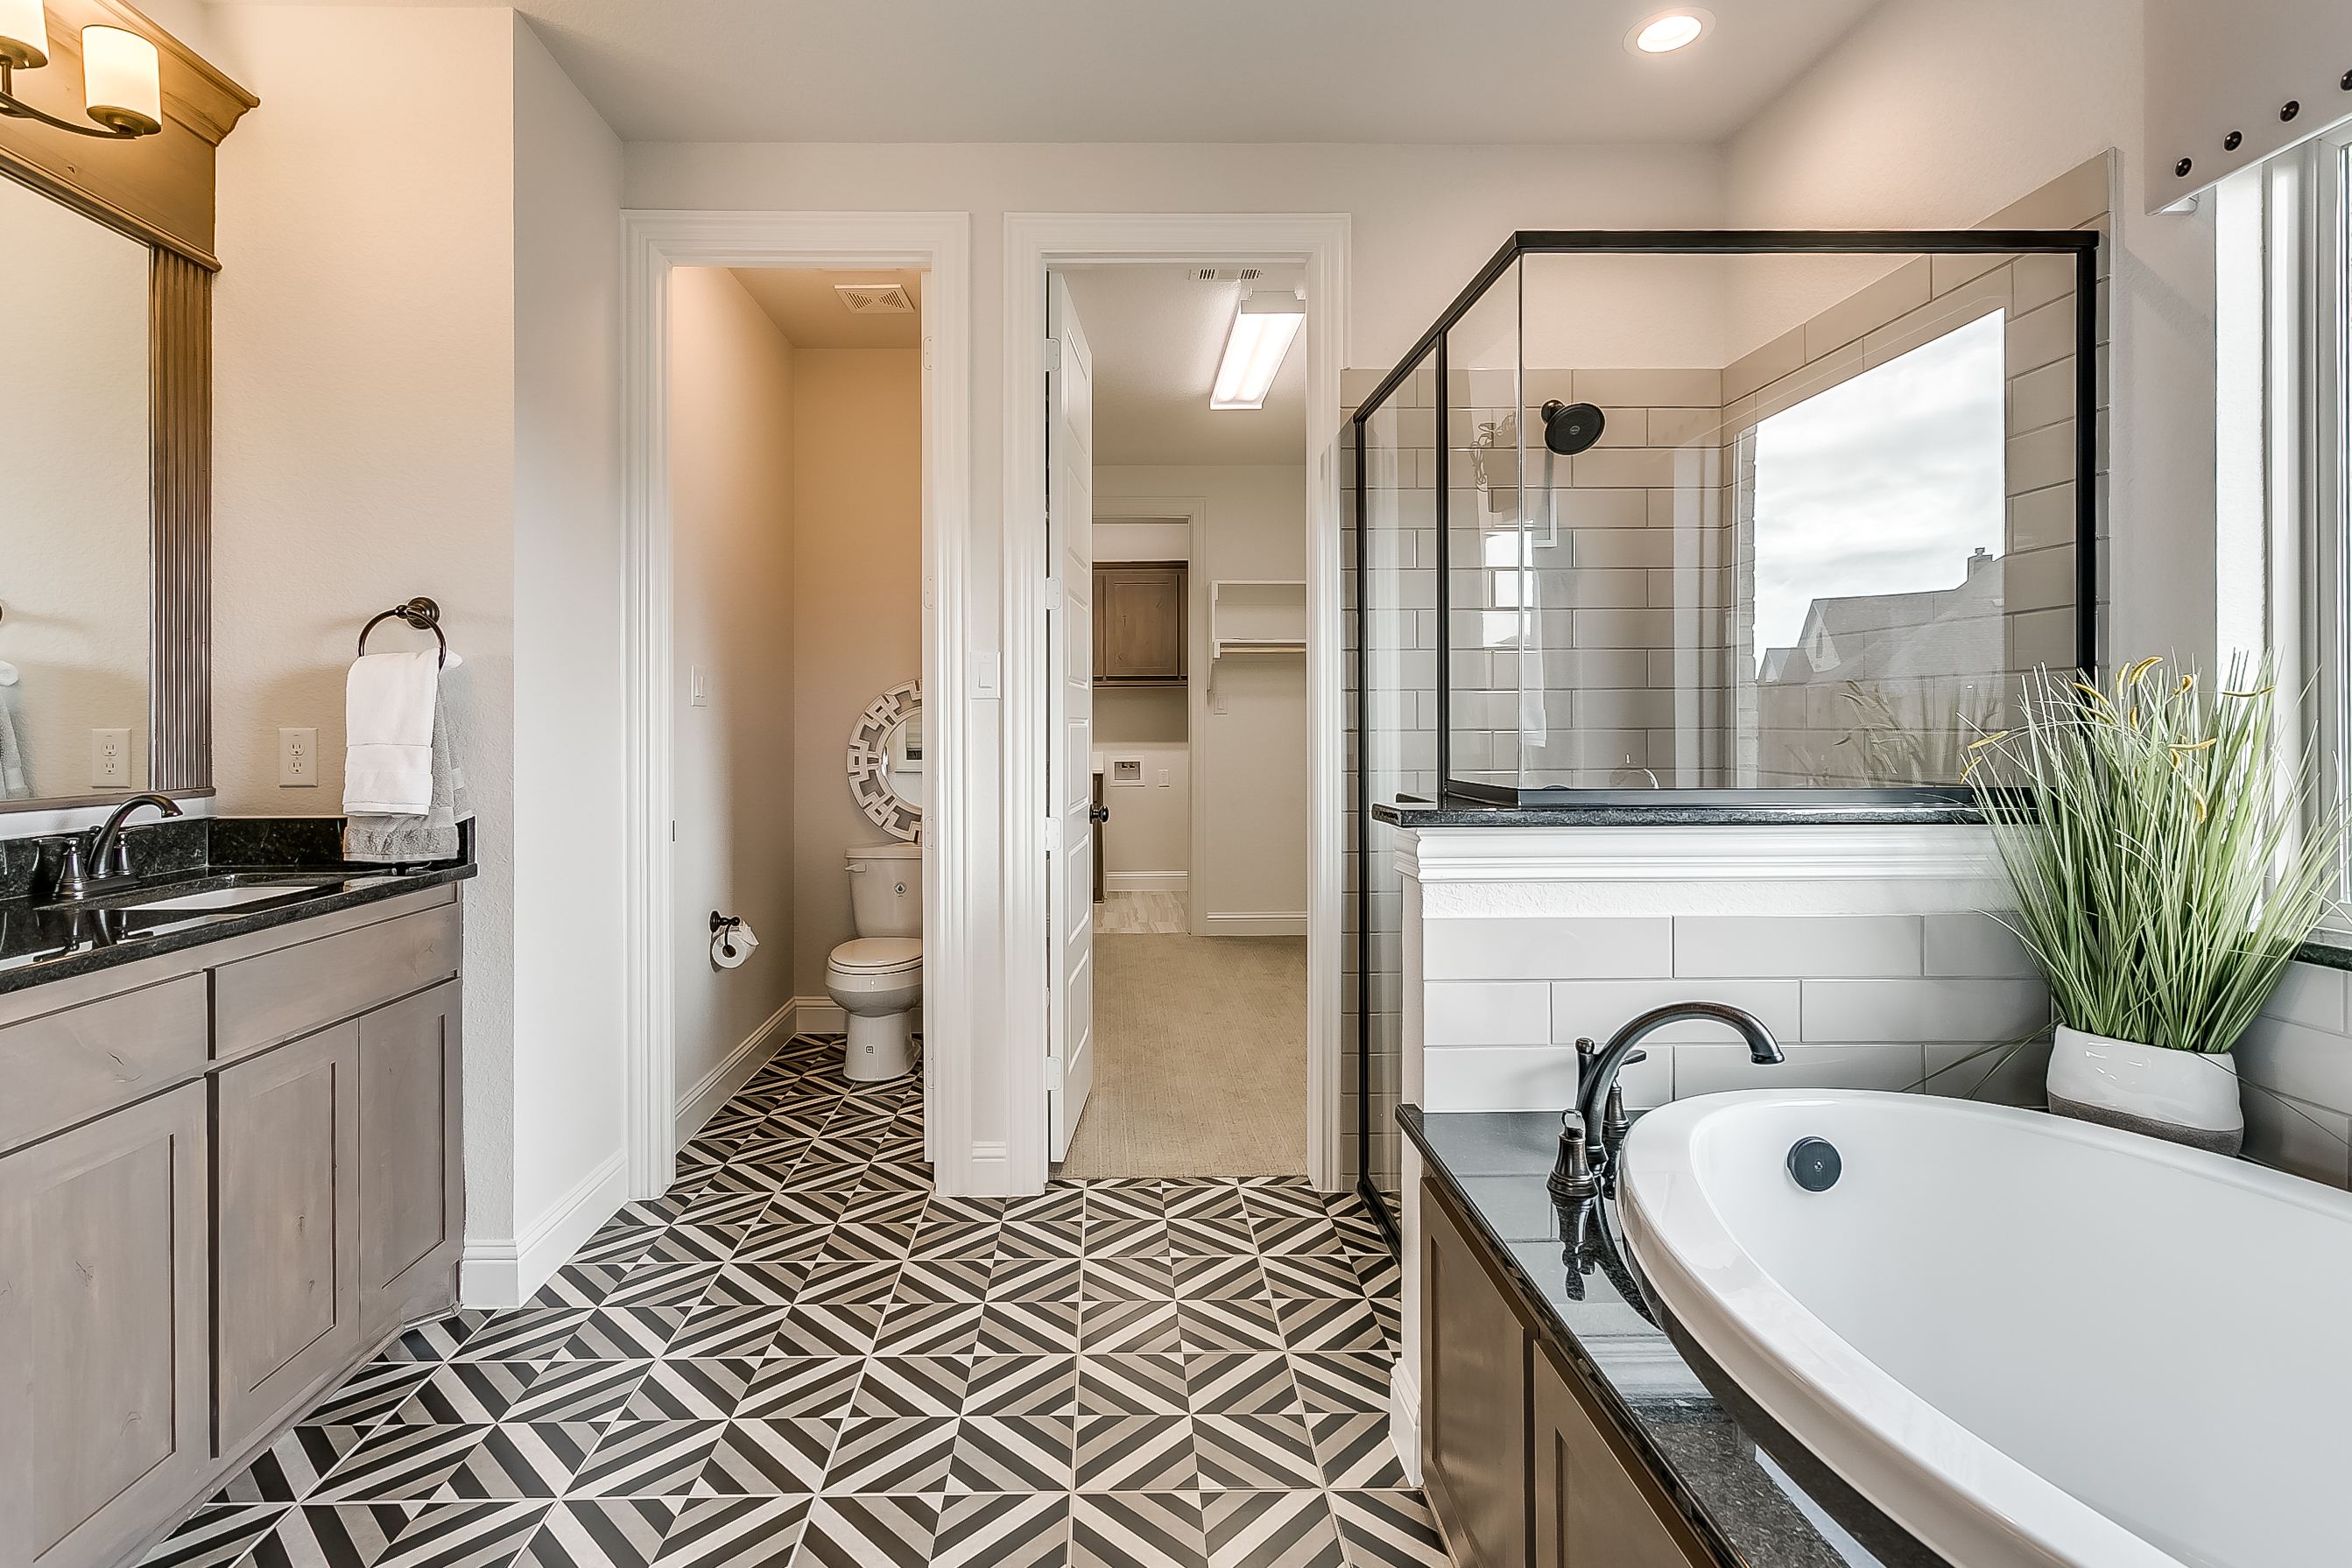 Estates at North Grove, Waxahachie, new homes for sale, waxahachie home builder, ellis county, model home, 3d gallery, 3d home tour, model home photos, master bathroom, pattern tile, subway tile shower